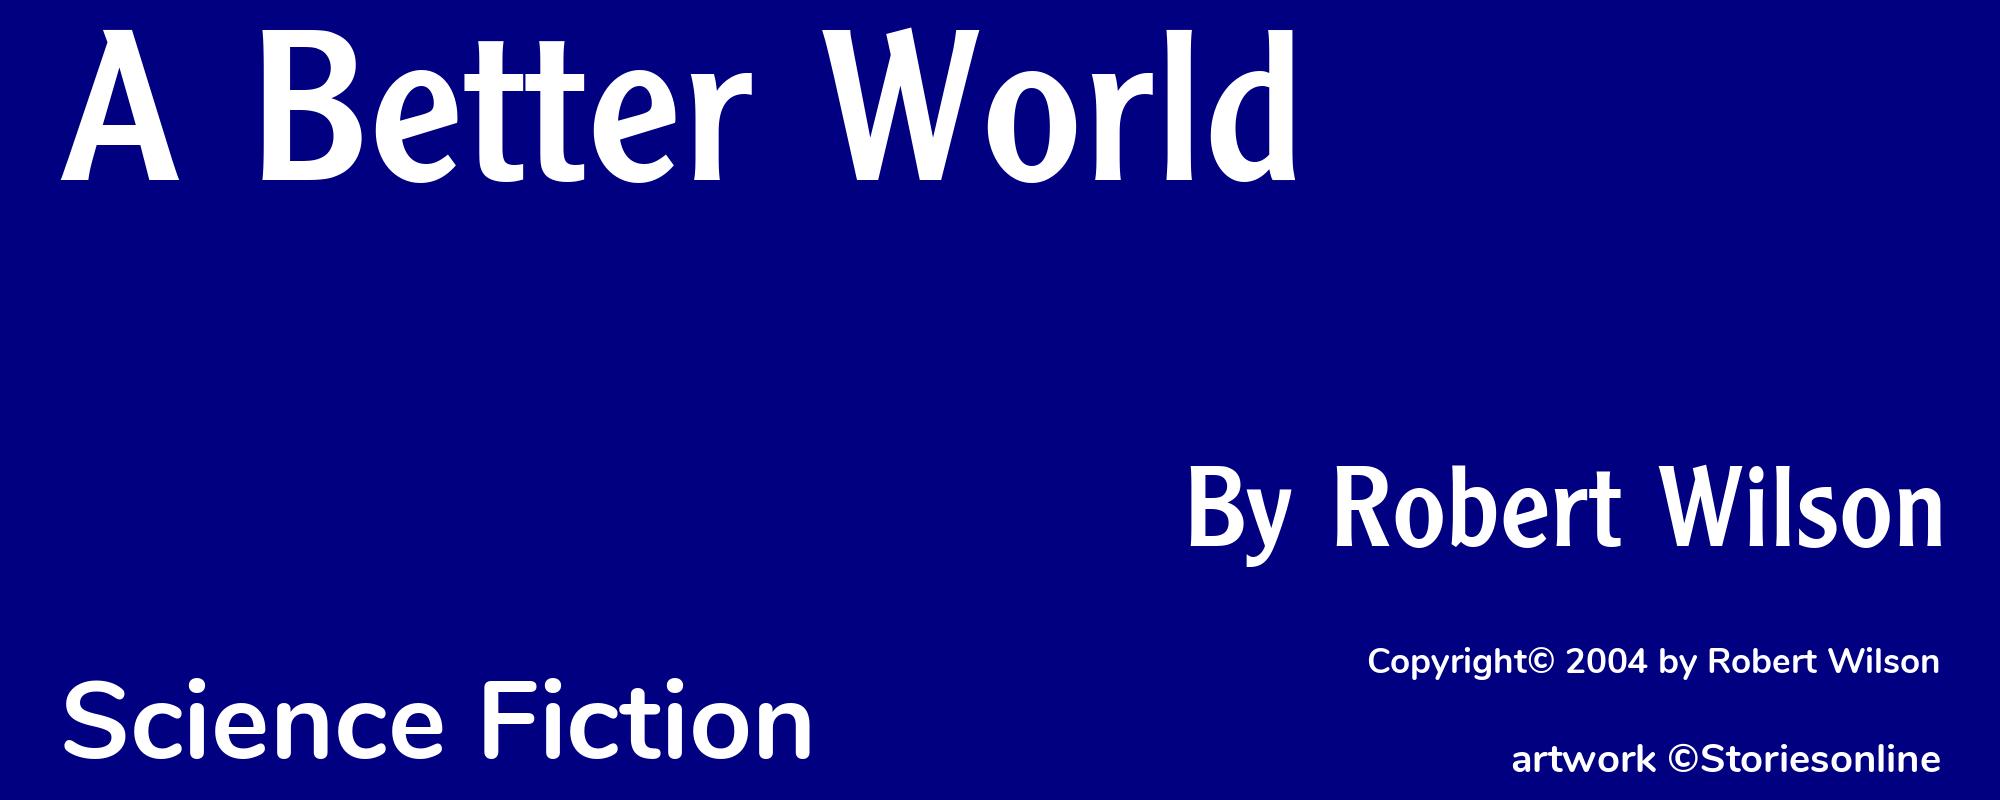 A Better World - Cover